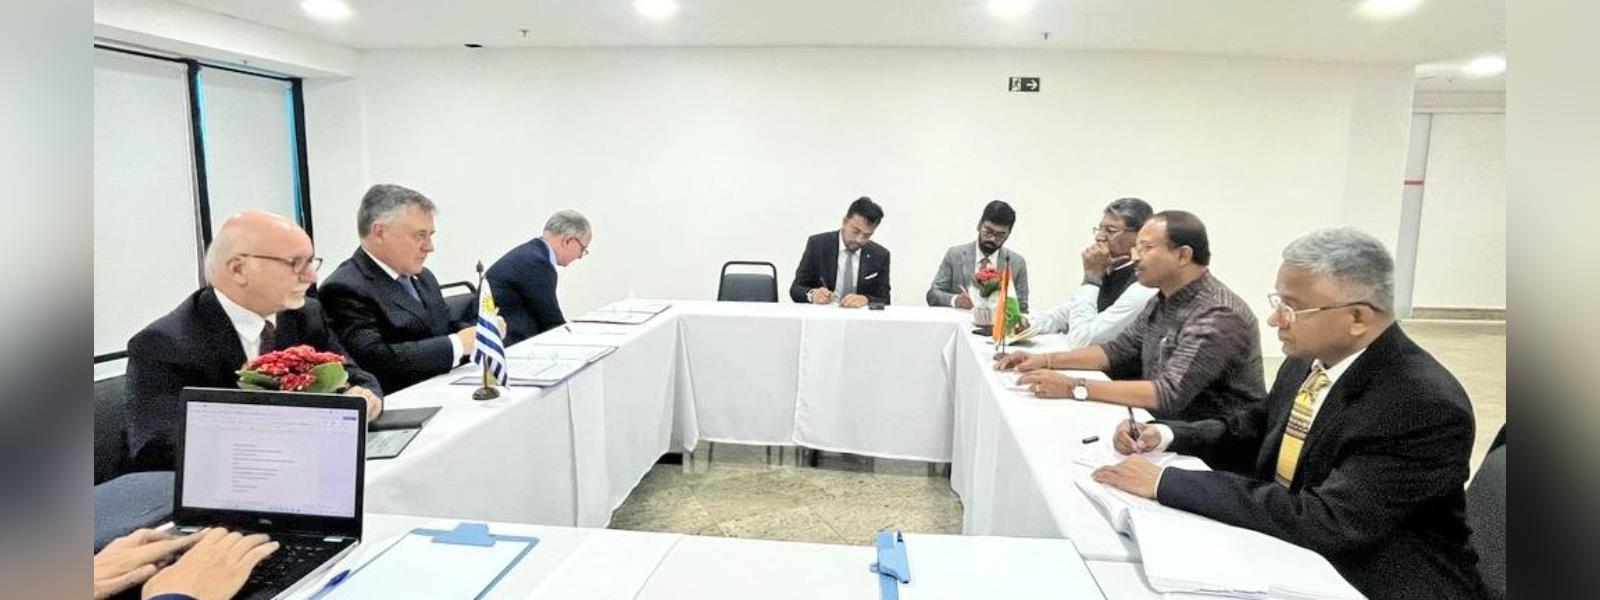 Minister of State for External Affairs Shri V. Muraleedharan met H.E. Mr. Omar Paganini, Foreign Minister of Uruguay on the sidelines of G20 Foreign Ministers' Meeting in Rio de janeiro